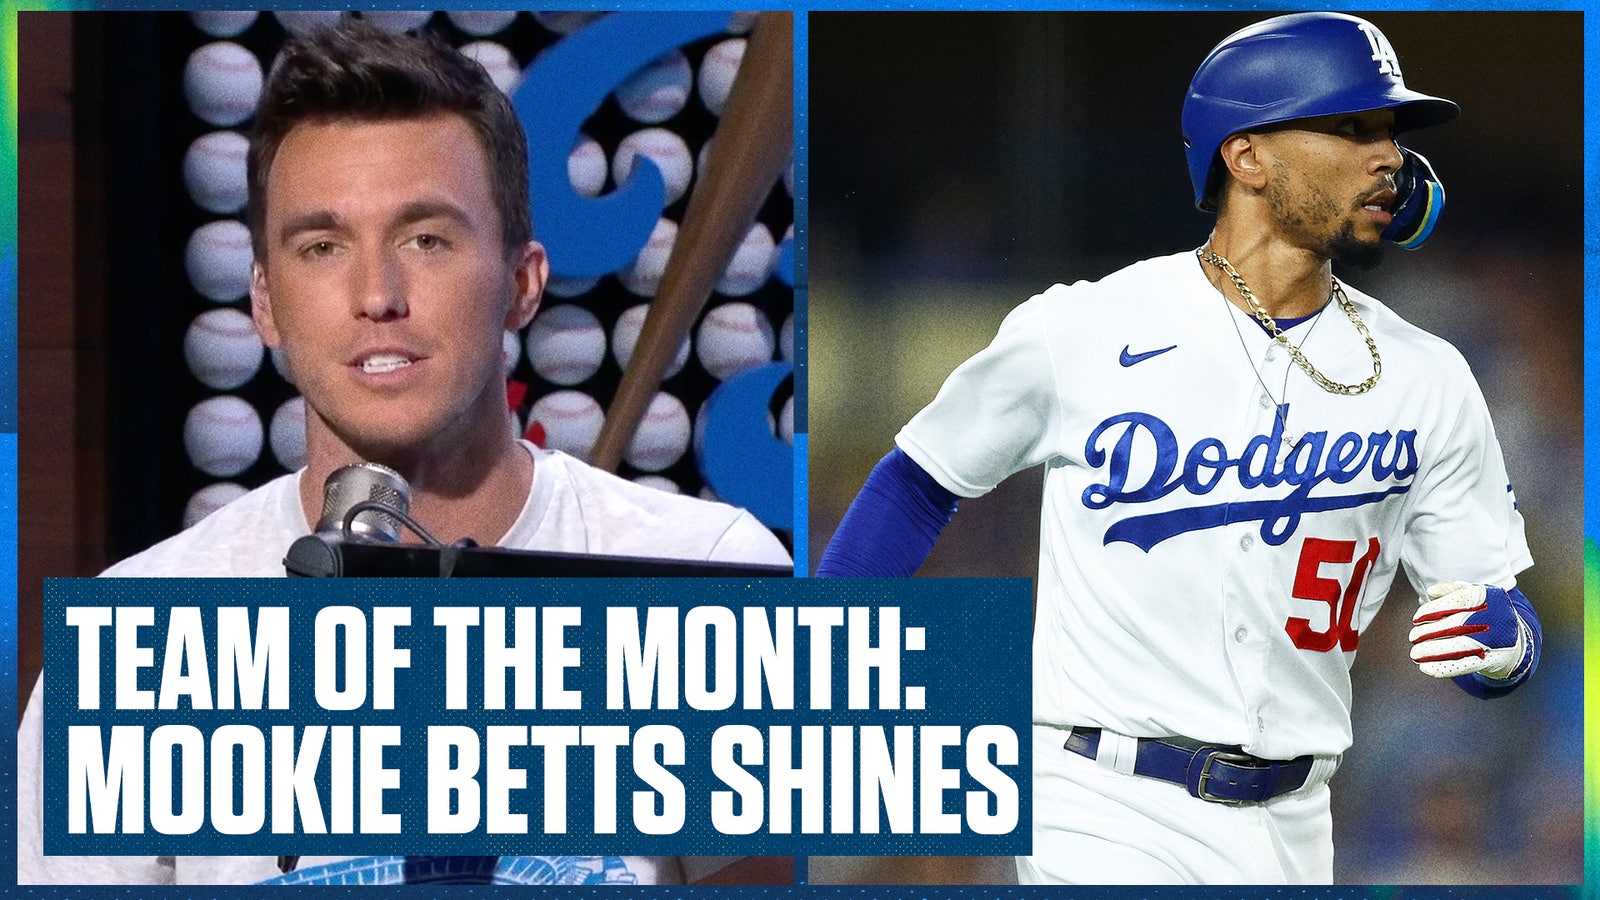 Braves' Ronald Acuña Jr. & Dodgers' Mookie Betts lead Team of the Month